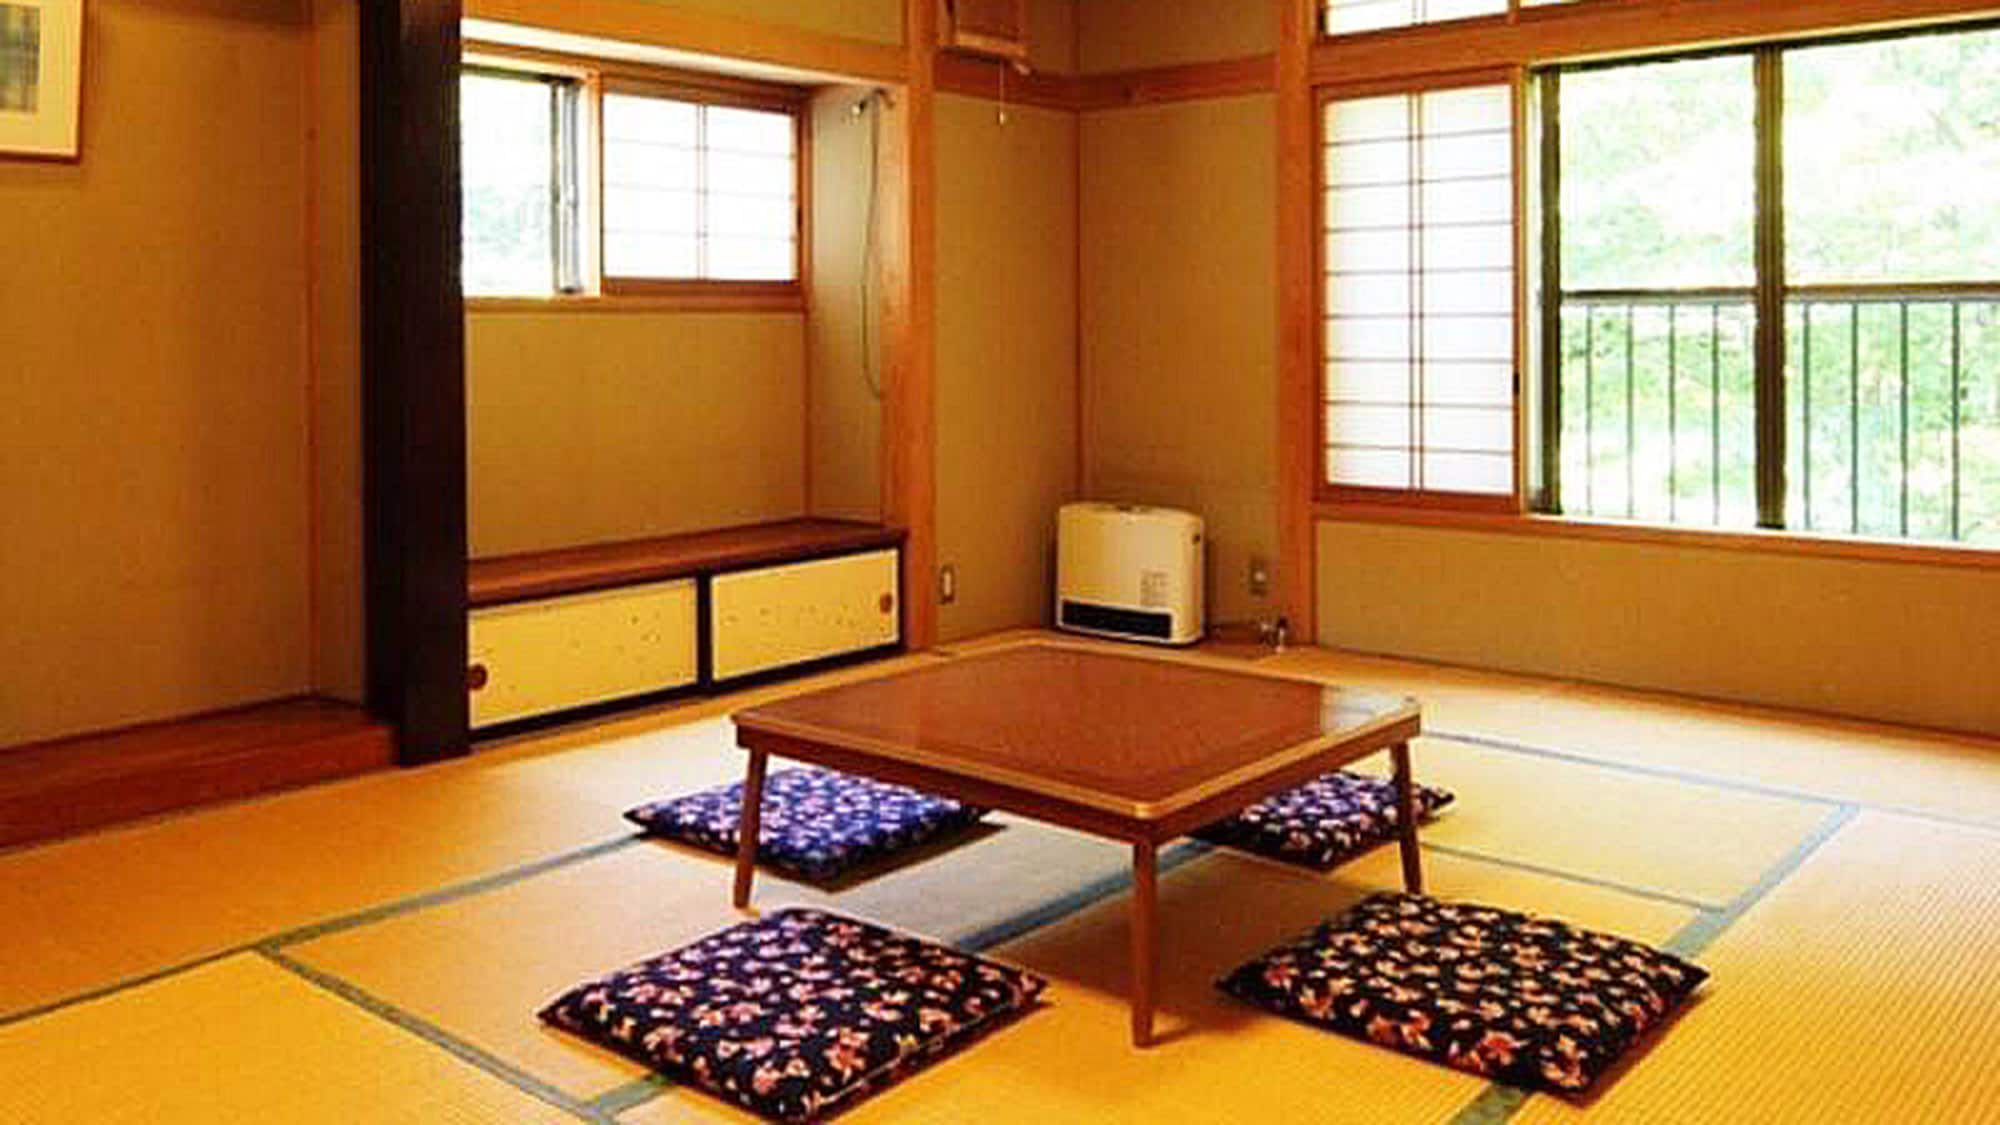 ・ [Guest room] Japanese-style room 12 tatami mats